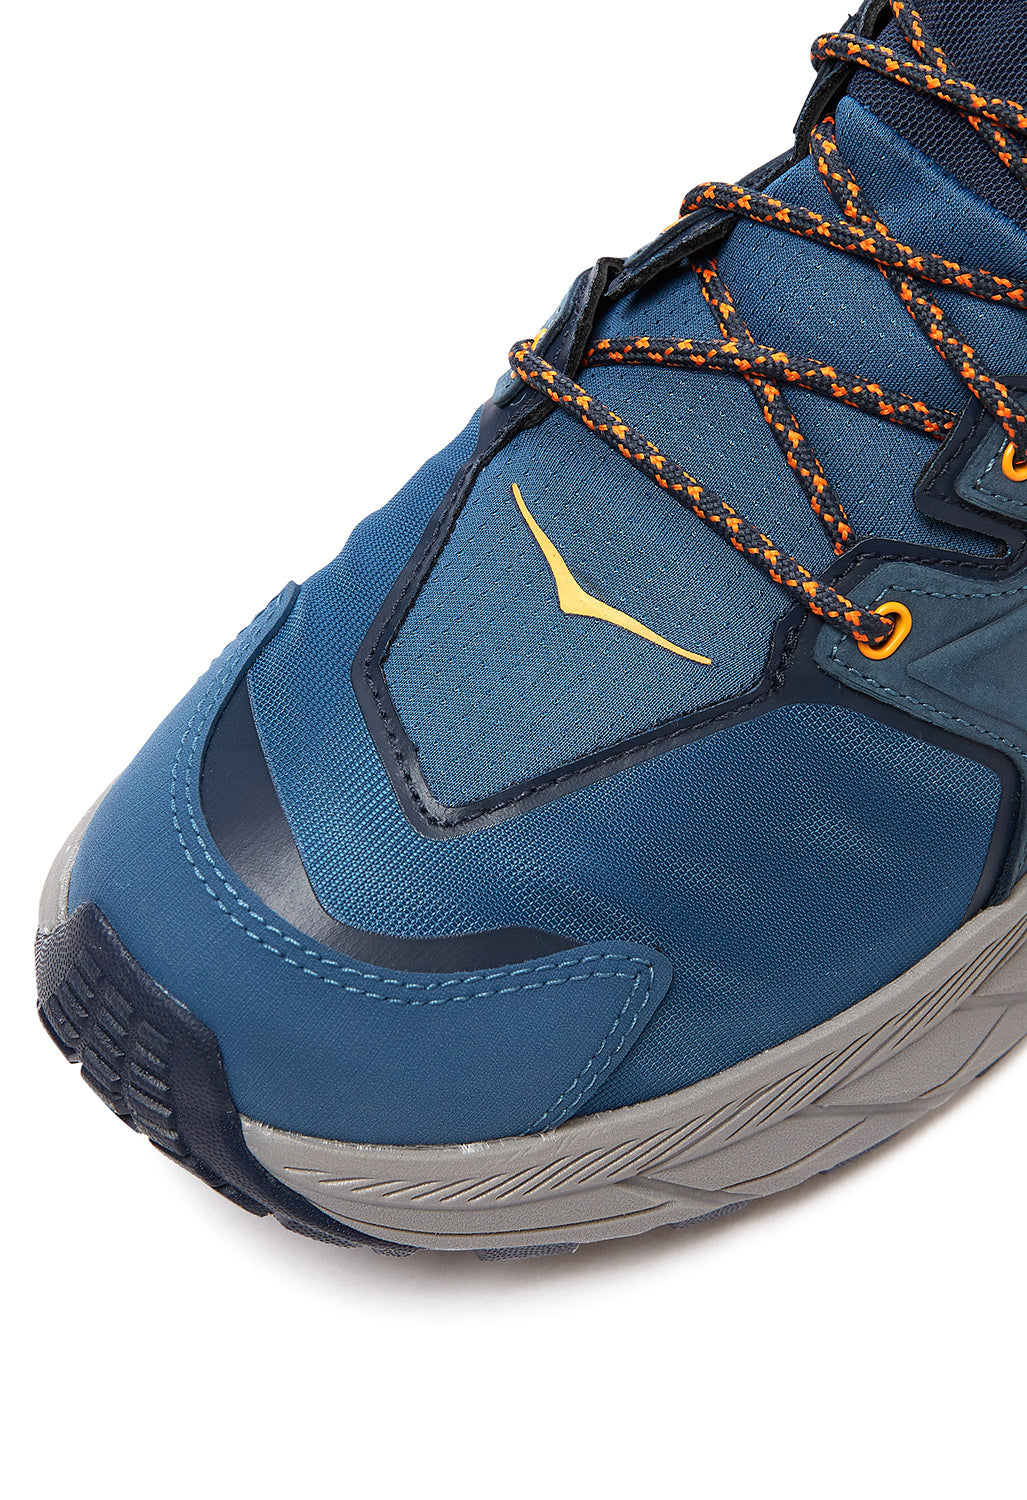 Hoka Anacapa Mid GORE-TEX Men's Boots - Real Teal/Outer Space